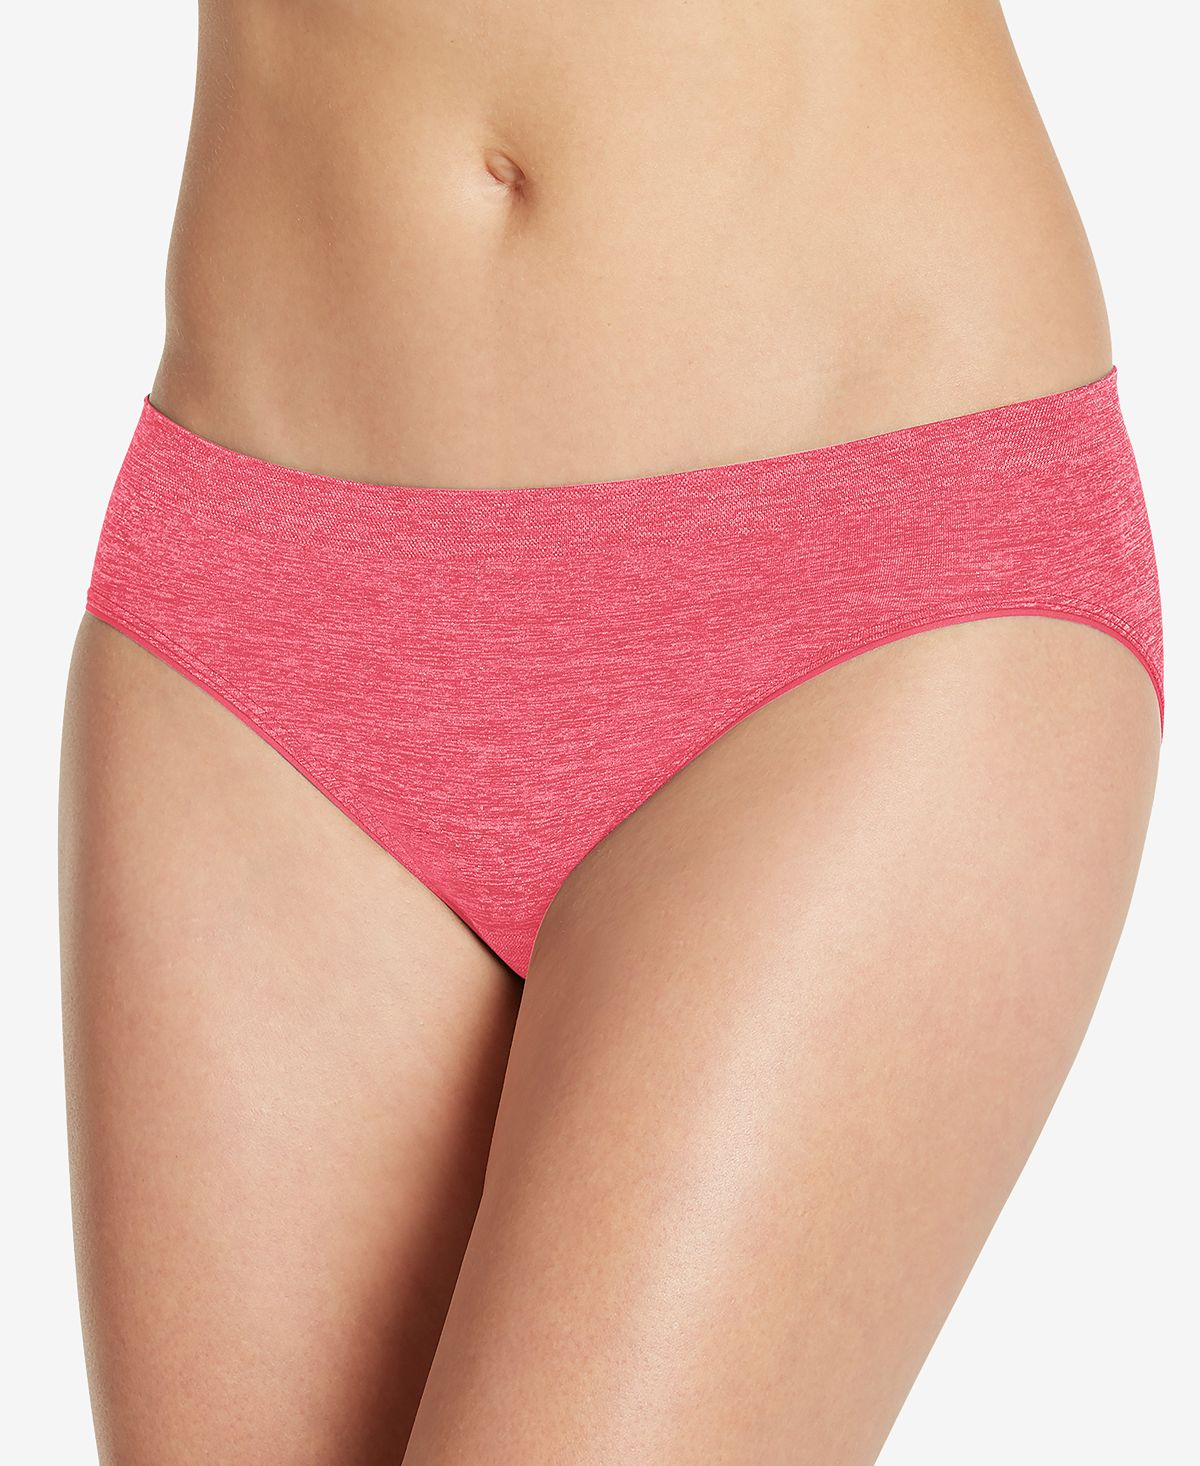 Jockey Smooth And Shine Seamfree Heathered Bikini Underwear 2186 Available In Extended Sizes Berry Bloom